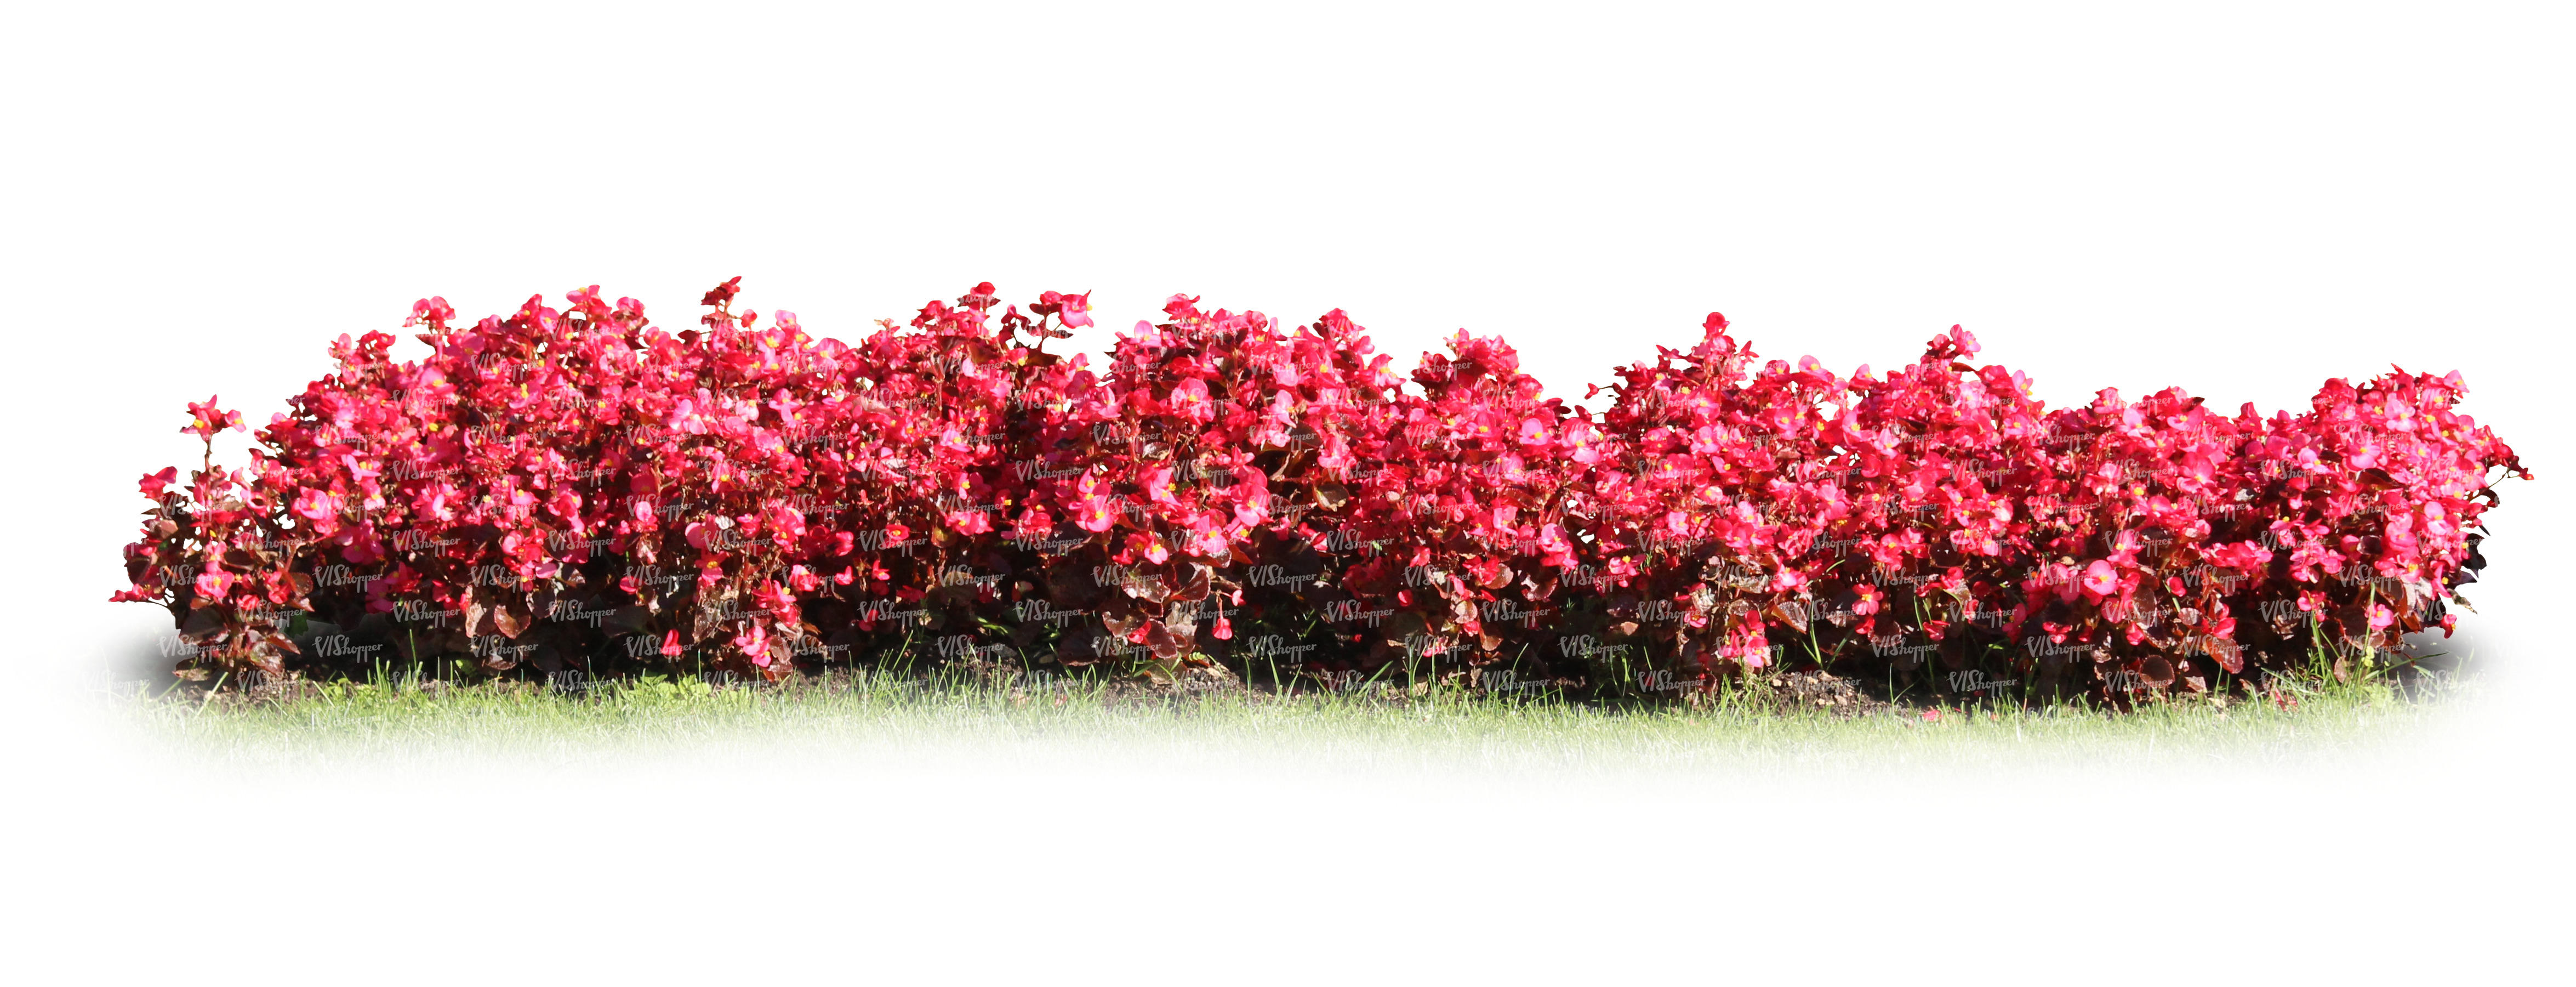 row of blooming red flowers - cut out trees and plants - VIShopper